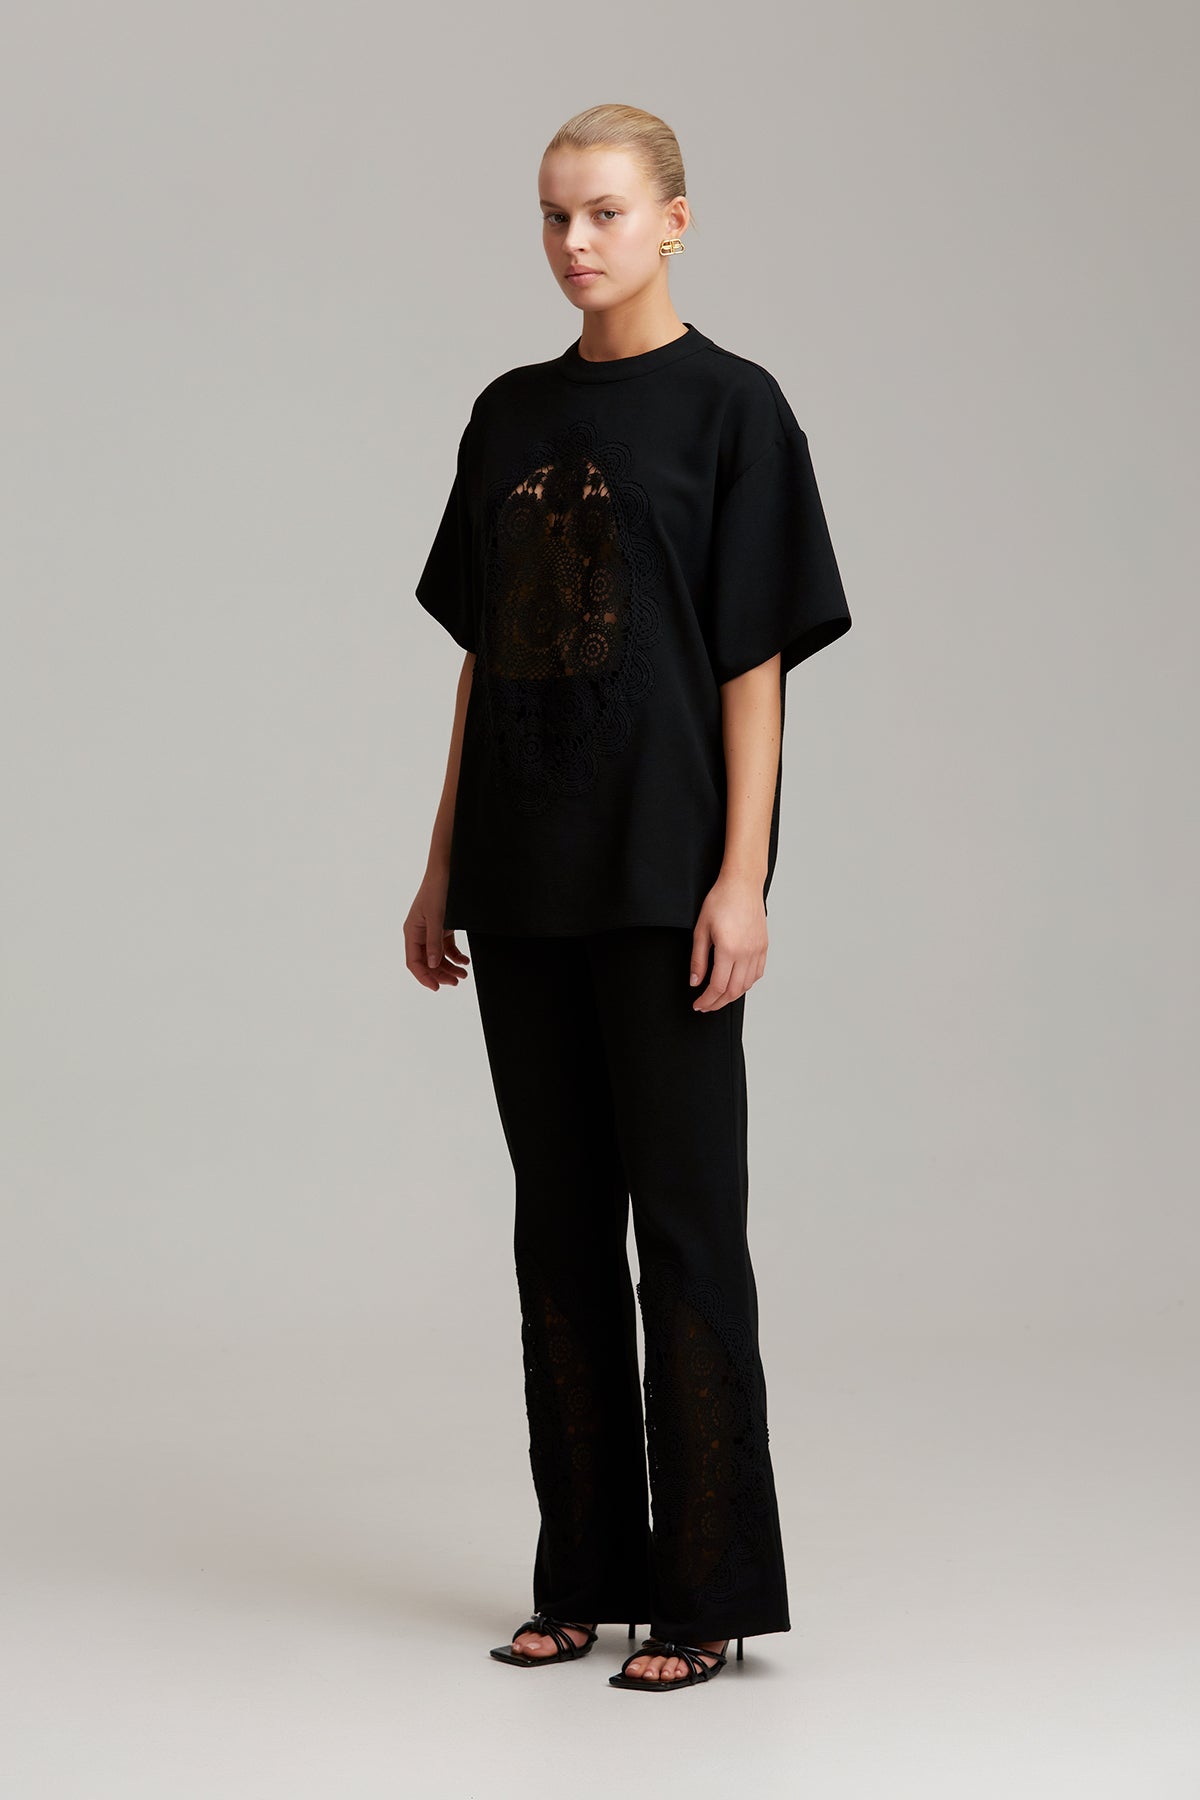 C/MEO Collective - Moments Ago Pant - Black